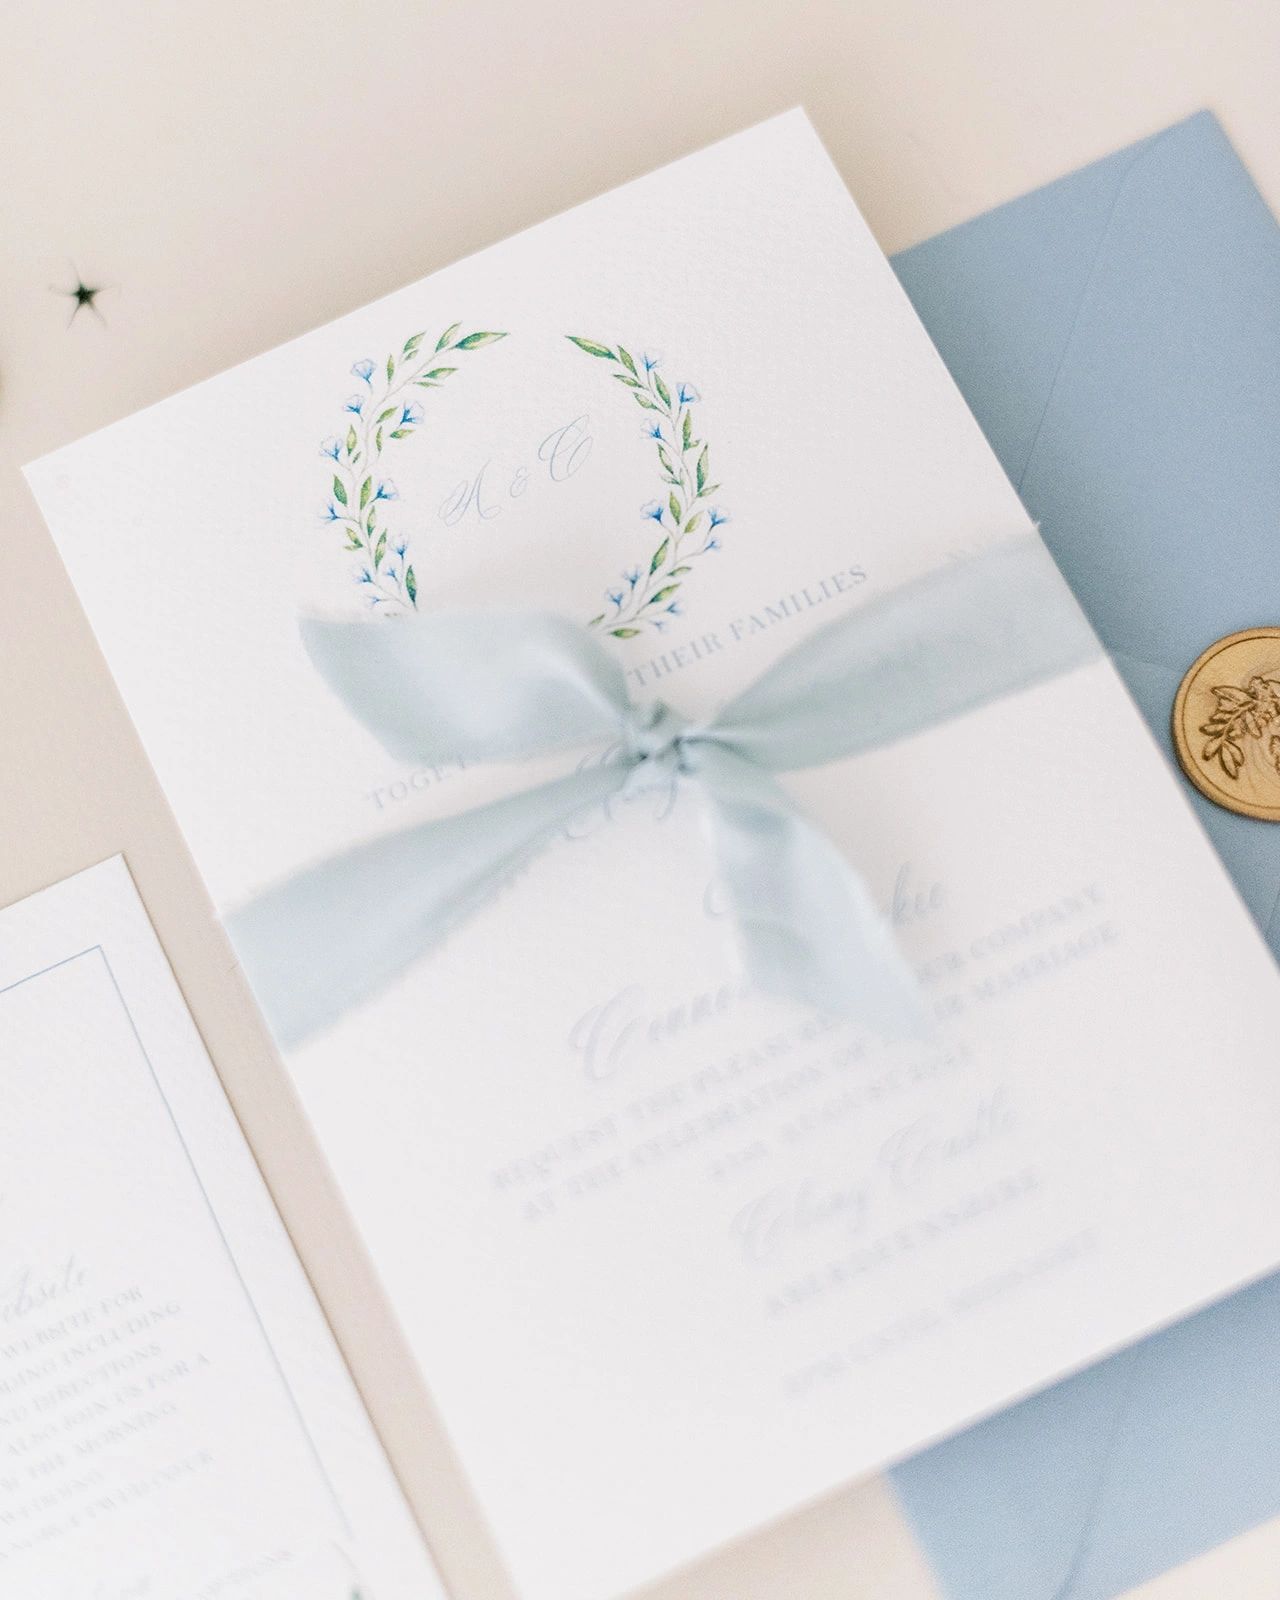 Blue floral watercolour invitation tied with blue ribbon and a gold wax seal